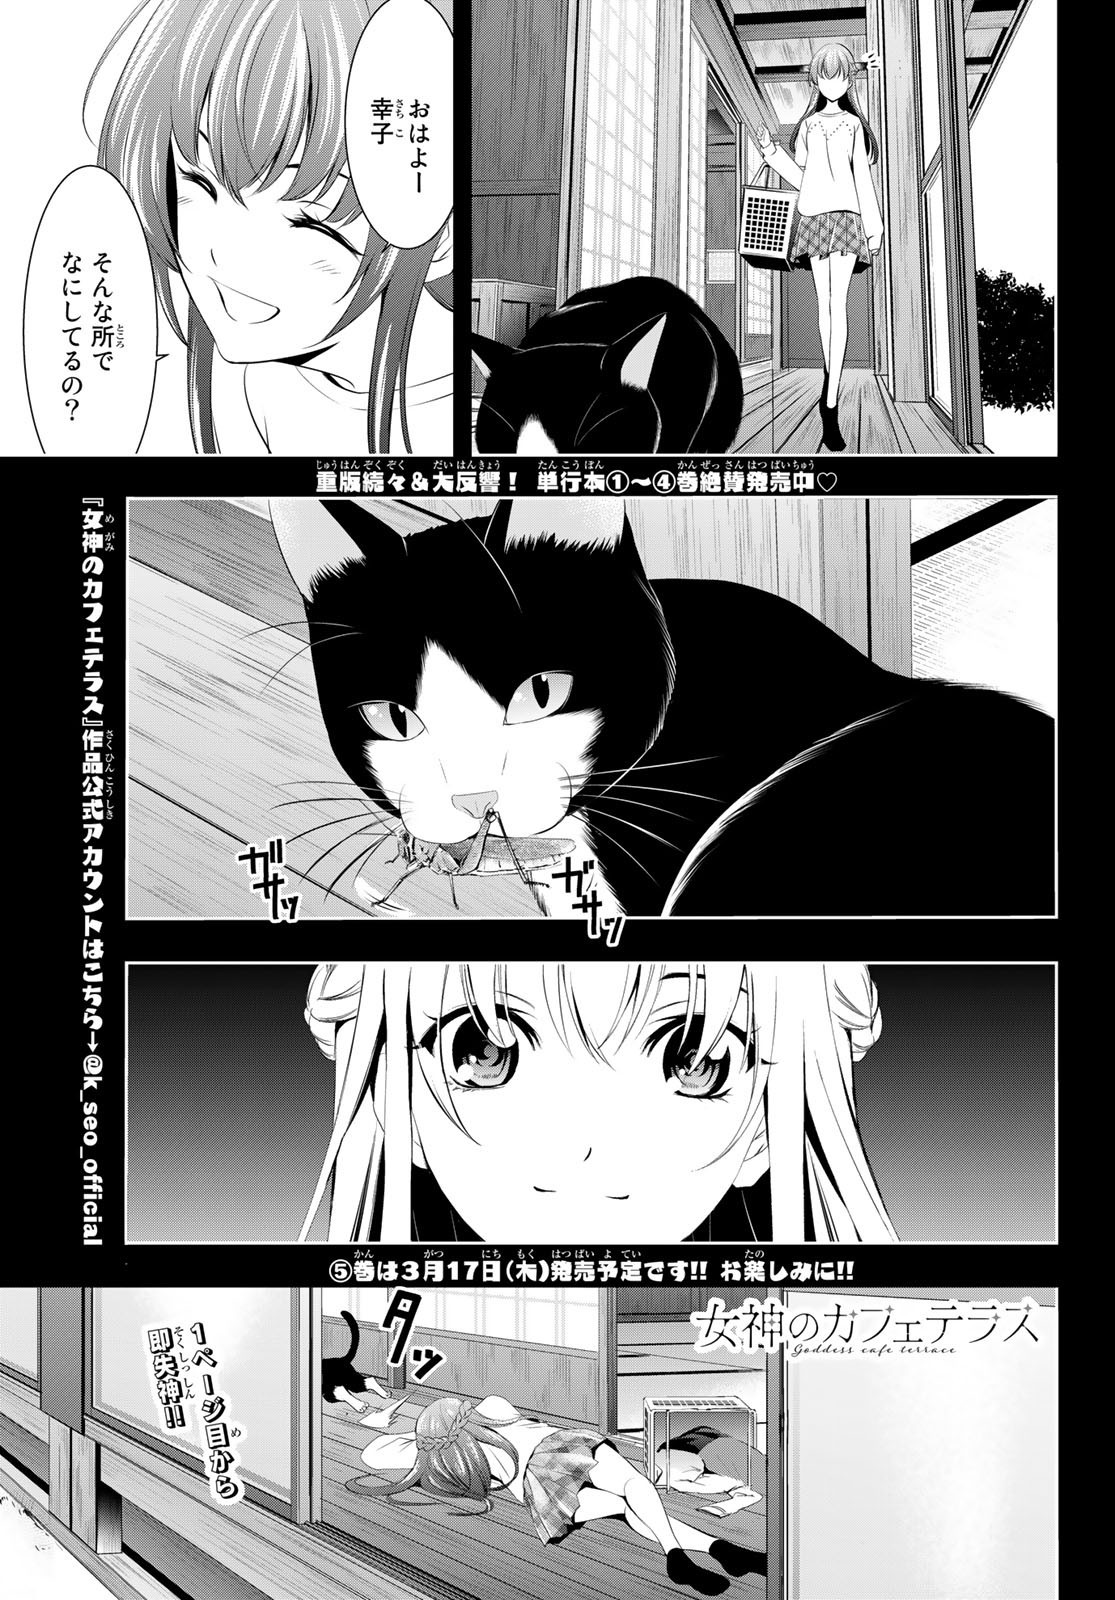 Goddess-Cafe-Terrace - Chapter 046 - Page 1